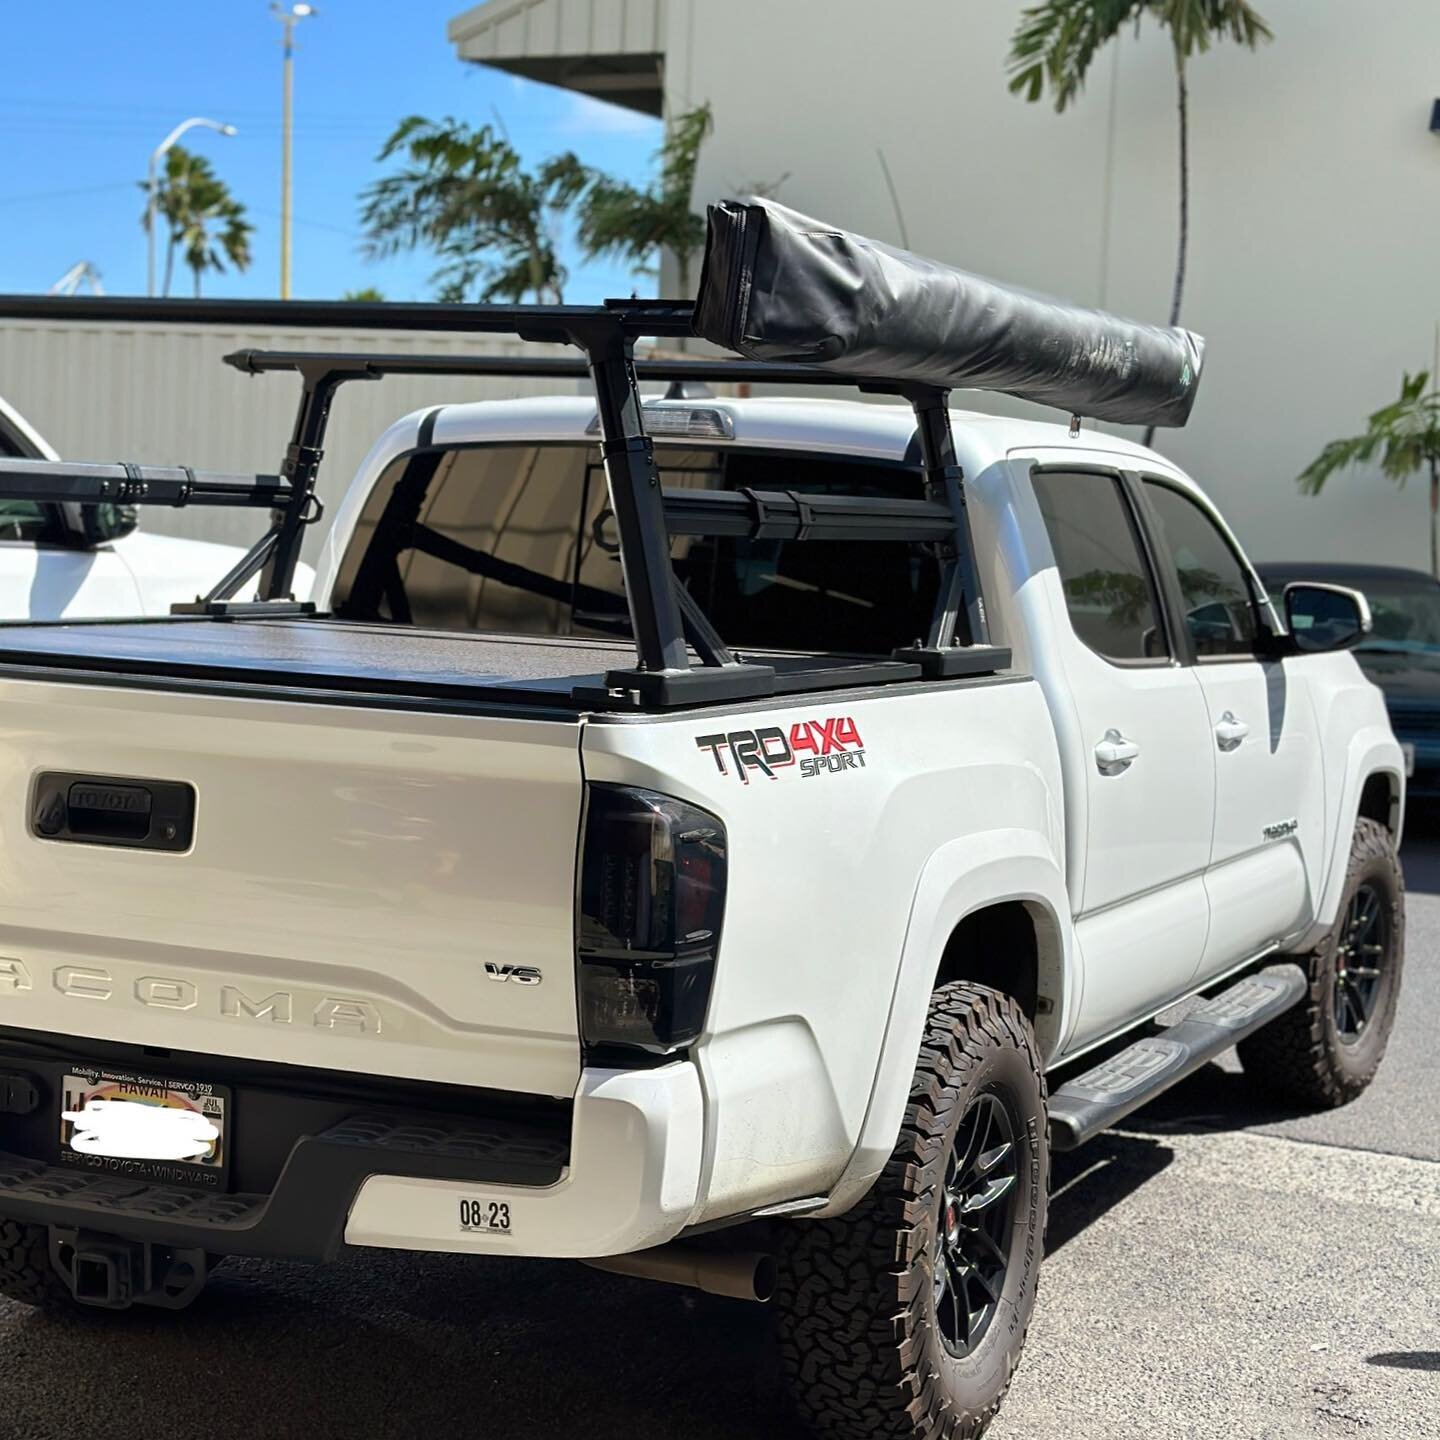 With summer right around the corner - call us today for quotes on bed racks and awnings! (808)554-8344 In stock today #toyota #toyotatacoma #retrax #retraxproxr #overlandvehiclesystems #overlandvehicle #pamalutruckbedshields